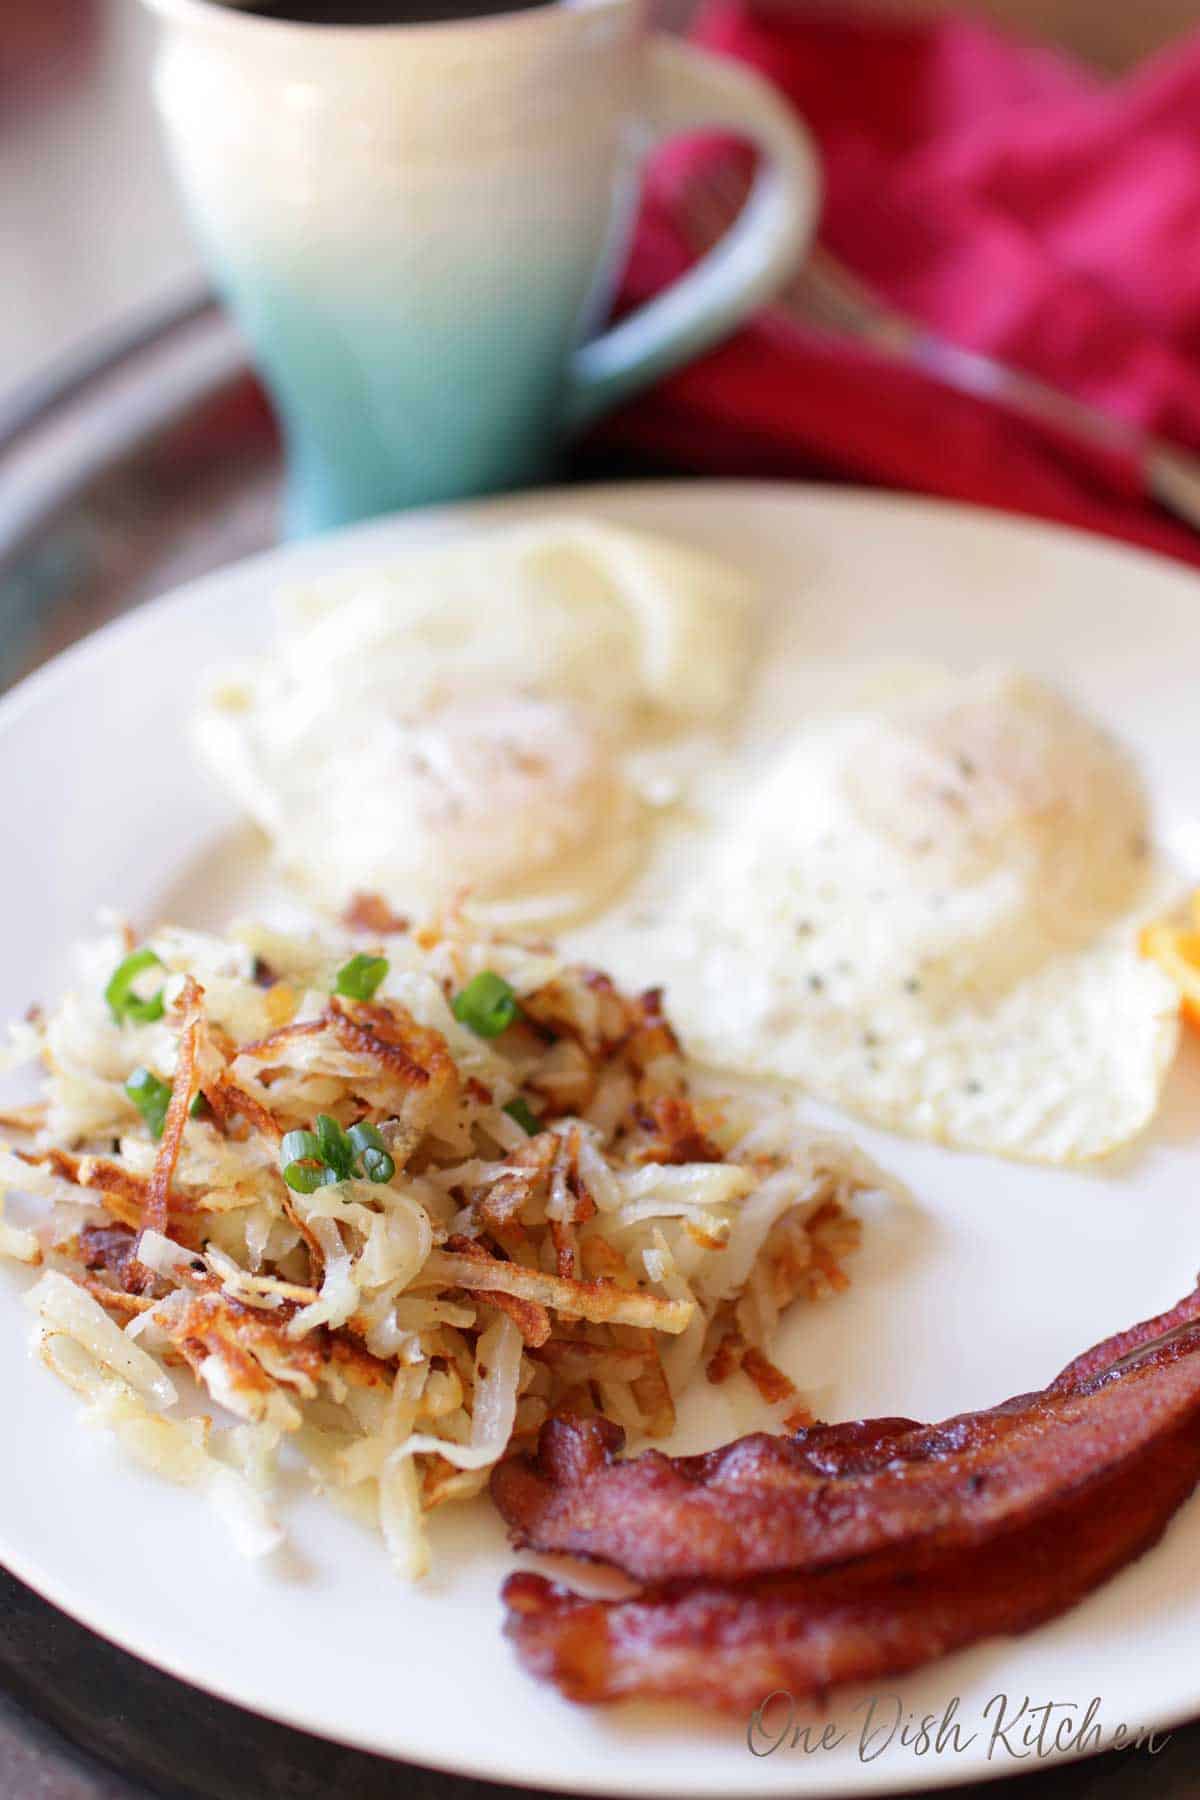 Hash browns with two slices of bacon and two eggs plated on a metal tray with a mug of coffee.